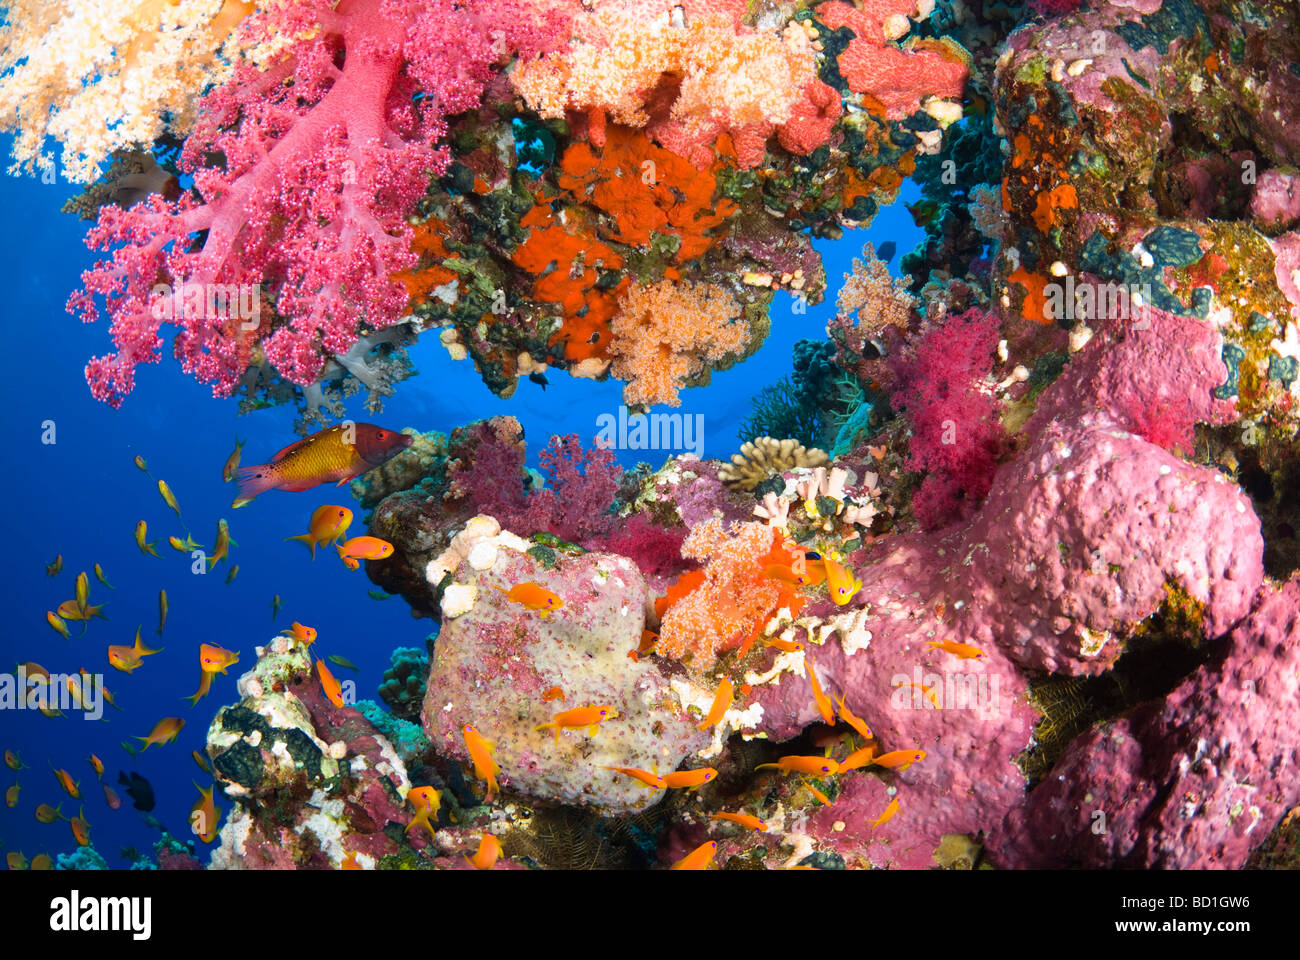 Colorful coral reef scene with purple soft corals and various tropical fish. Safaga, Red Sea Stock Photo